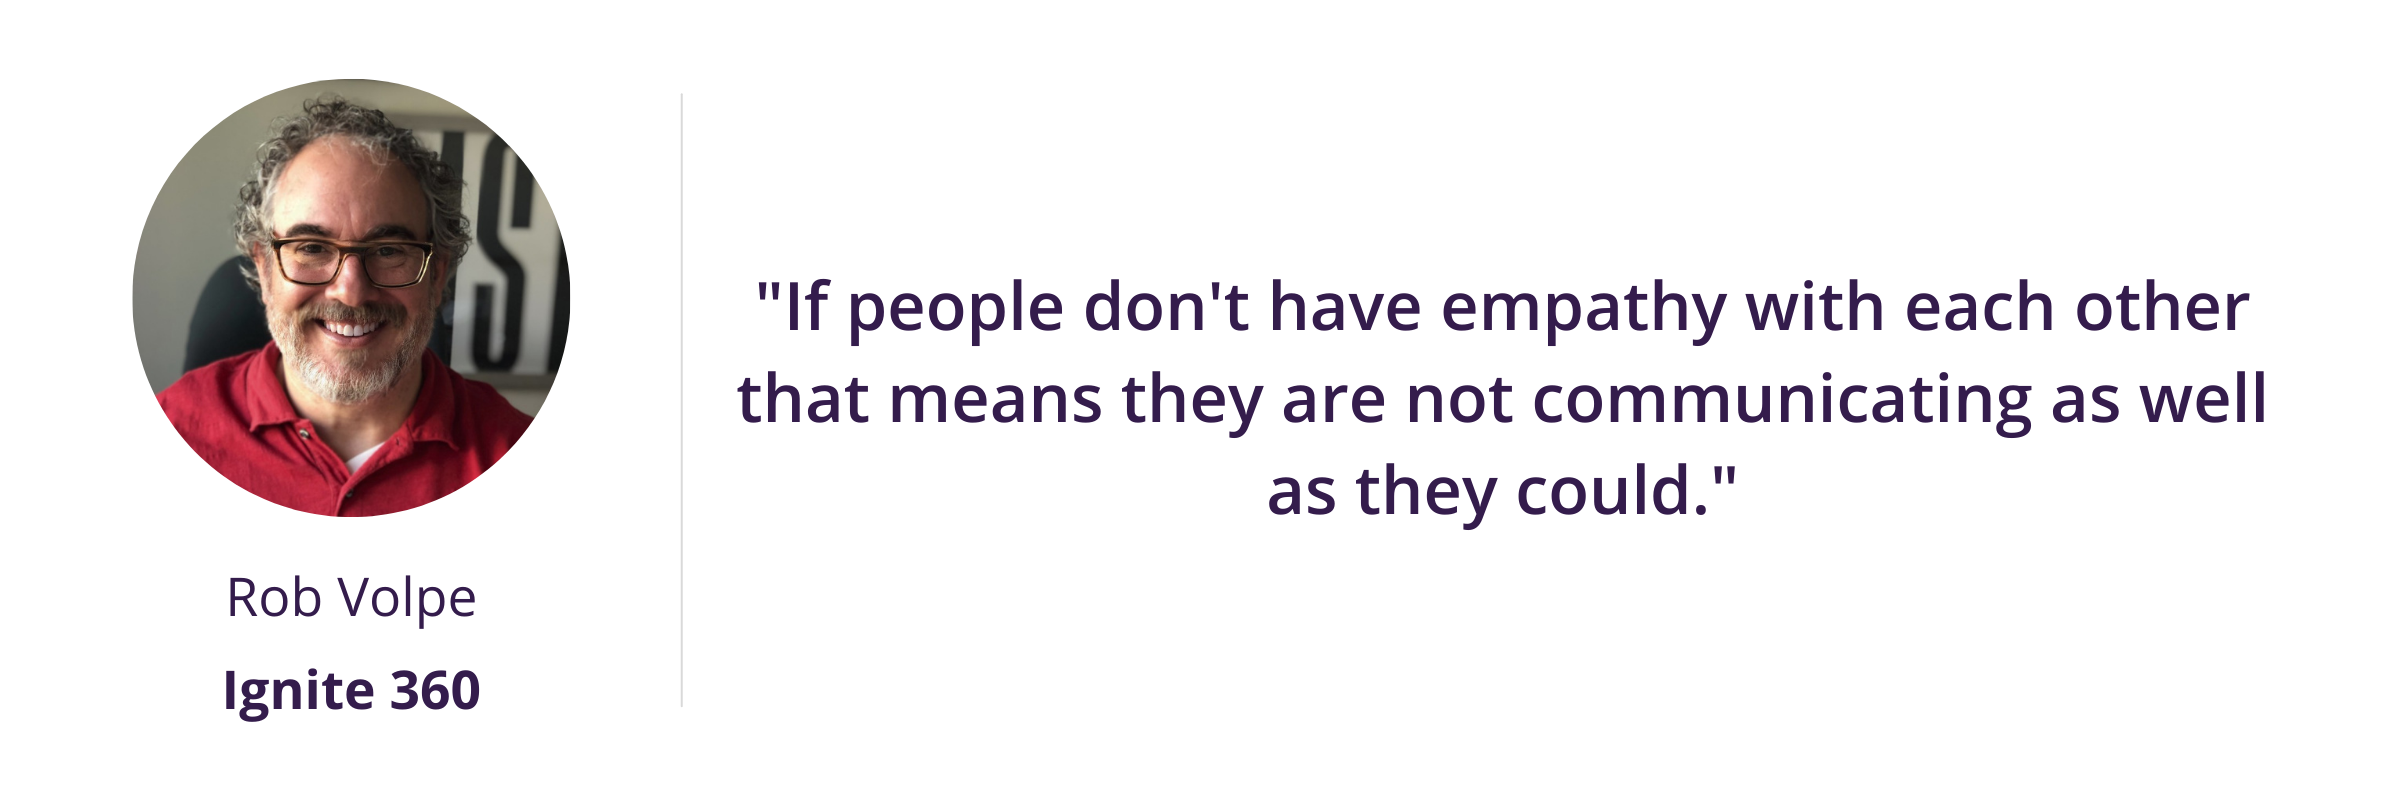 "If people don't have empathy with each other that means they are not communicating as well as they could."